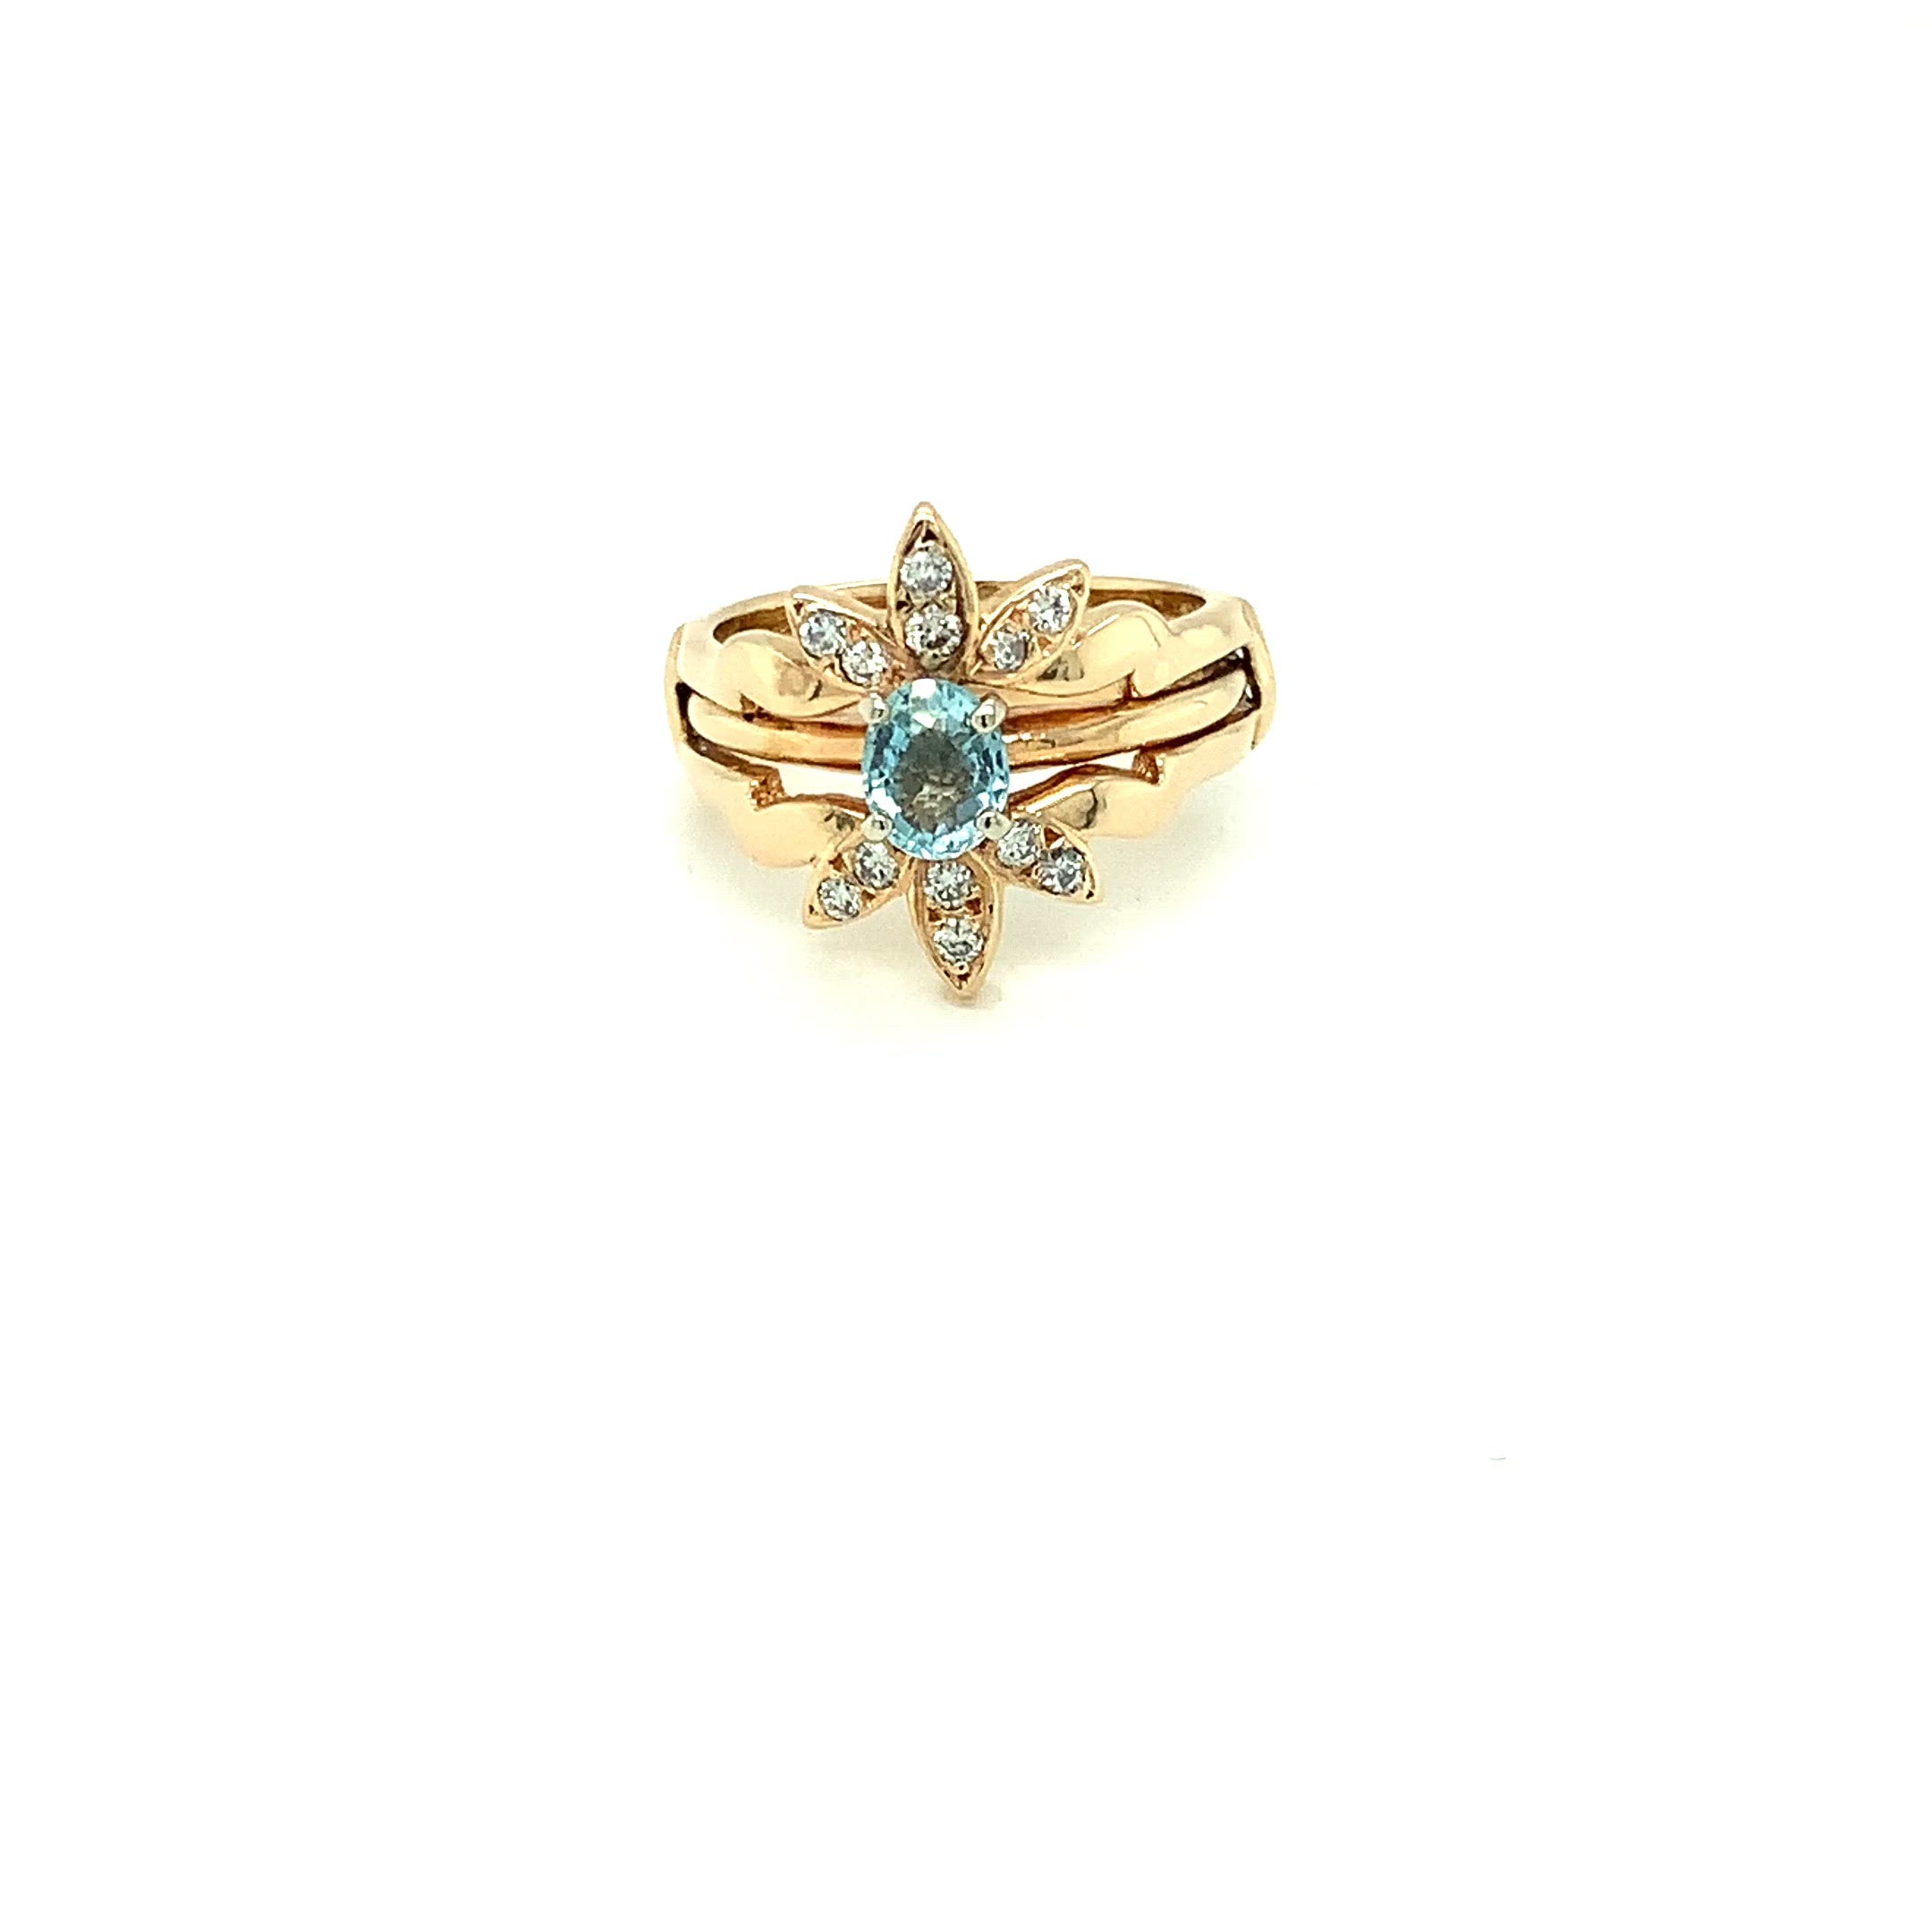 Natural Paraiba Tourmaline & Diamond Ring 14K Solid Gold 1.18tcw Women's Fine Ring Cluster Ring Cocktail Ring Estate Jewelry Fine Jewellery